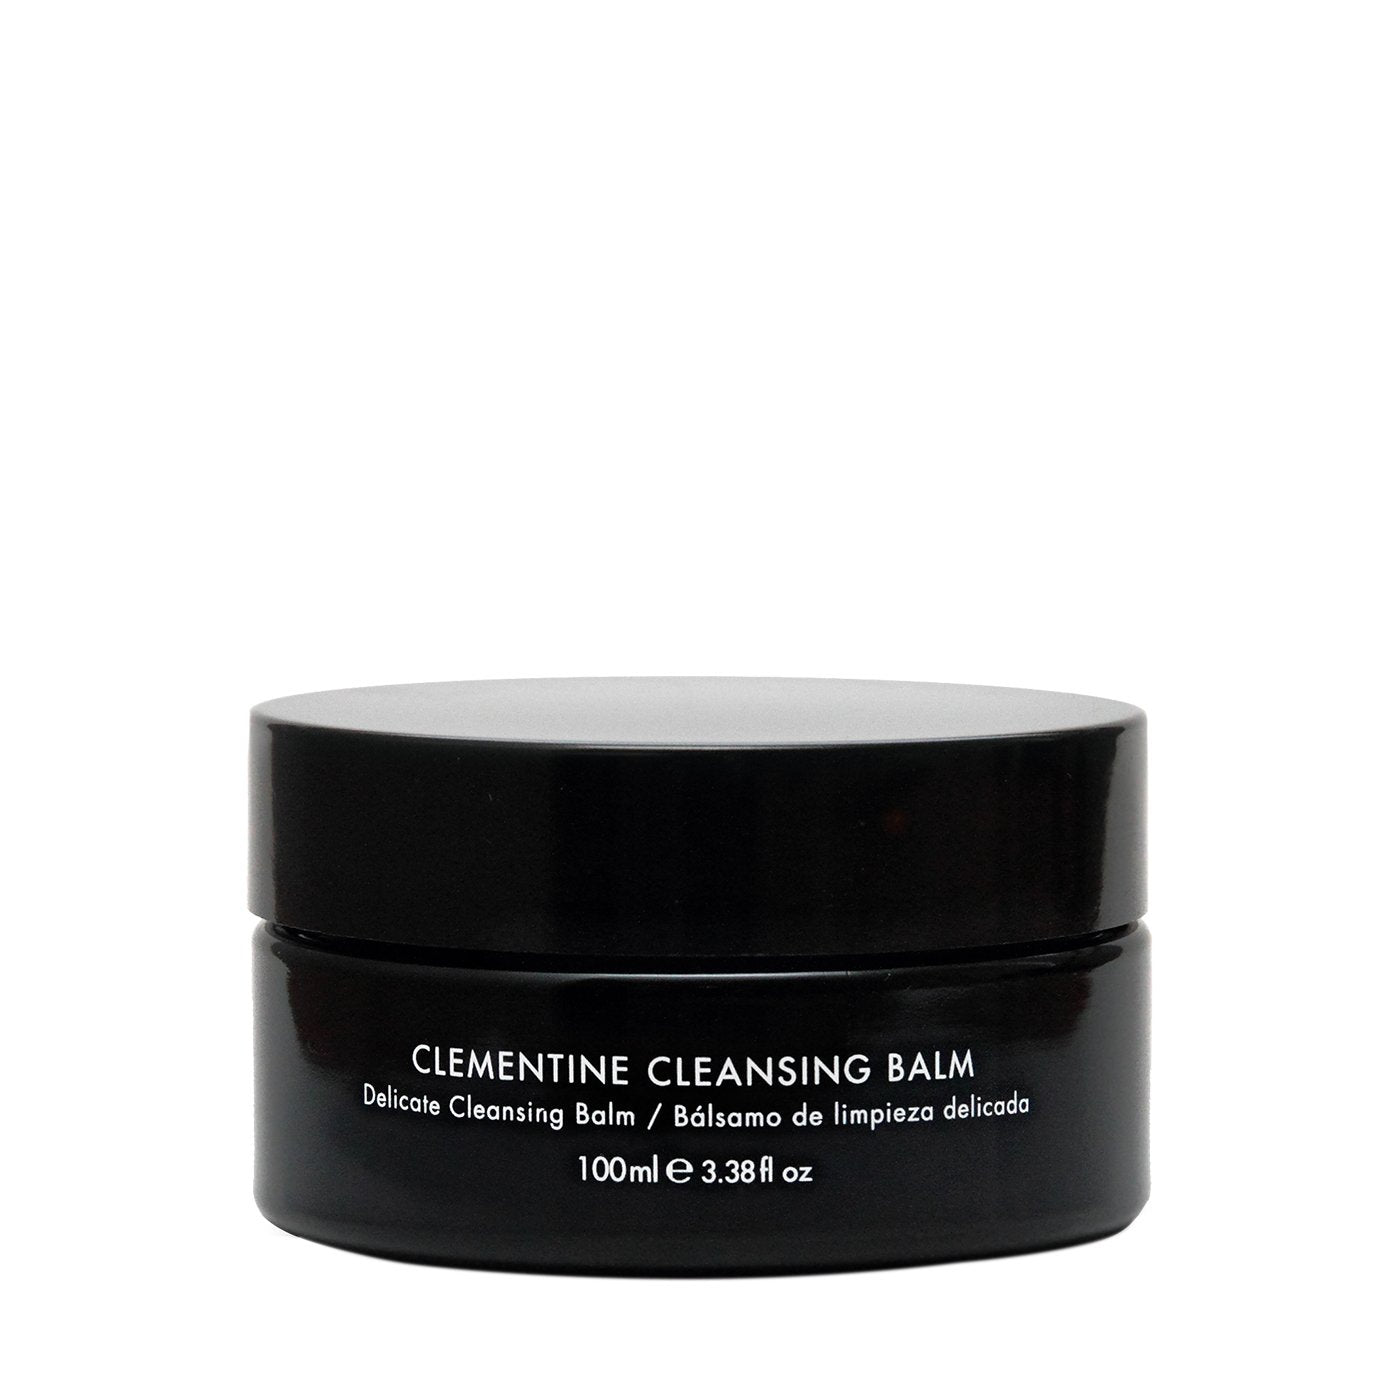 Twelve_Beauty_Clementine_Cleansing_Balm